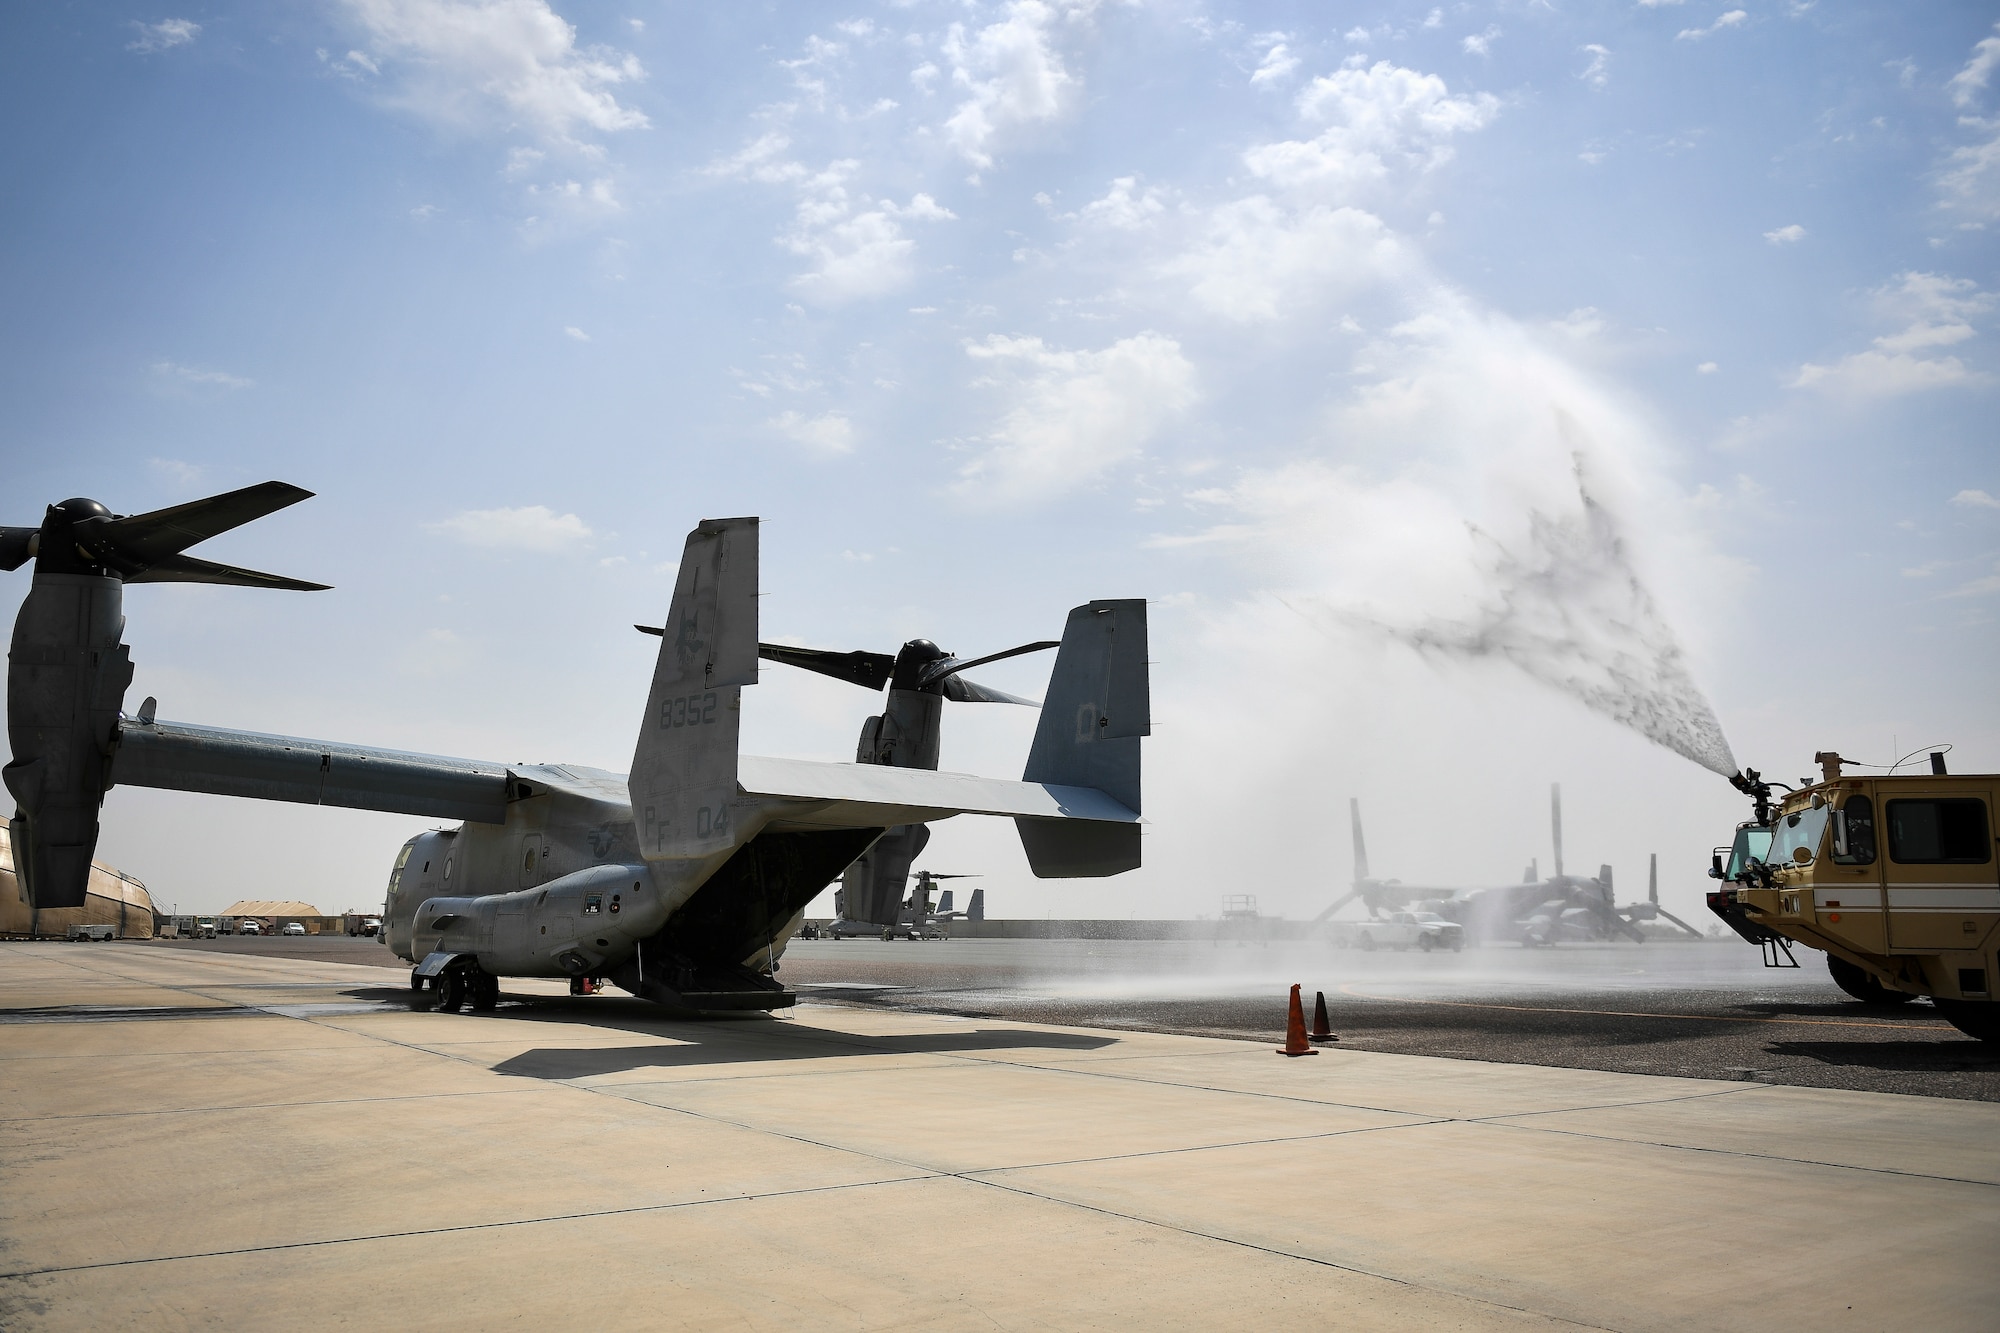 Firefighters from the 407th Expeditionary Civil Engineer Squadron spray a MV-22 Osprey with water during an airfield exercise at Ahmed al-Jaber Air Base, Kuwait, Aug. 16, 2019. The exercise was an opportunity for service members from multiple branches to cooperate on one of the most intense scenarios a firefighter could be called for: an aircraft on fire on the flightline. (U.S. Air Force photo by Staff Sgt. Mozer O. Da Cunha)